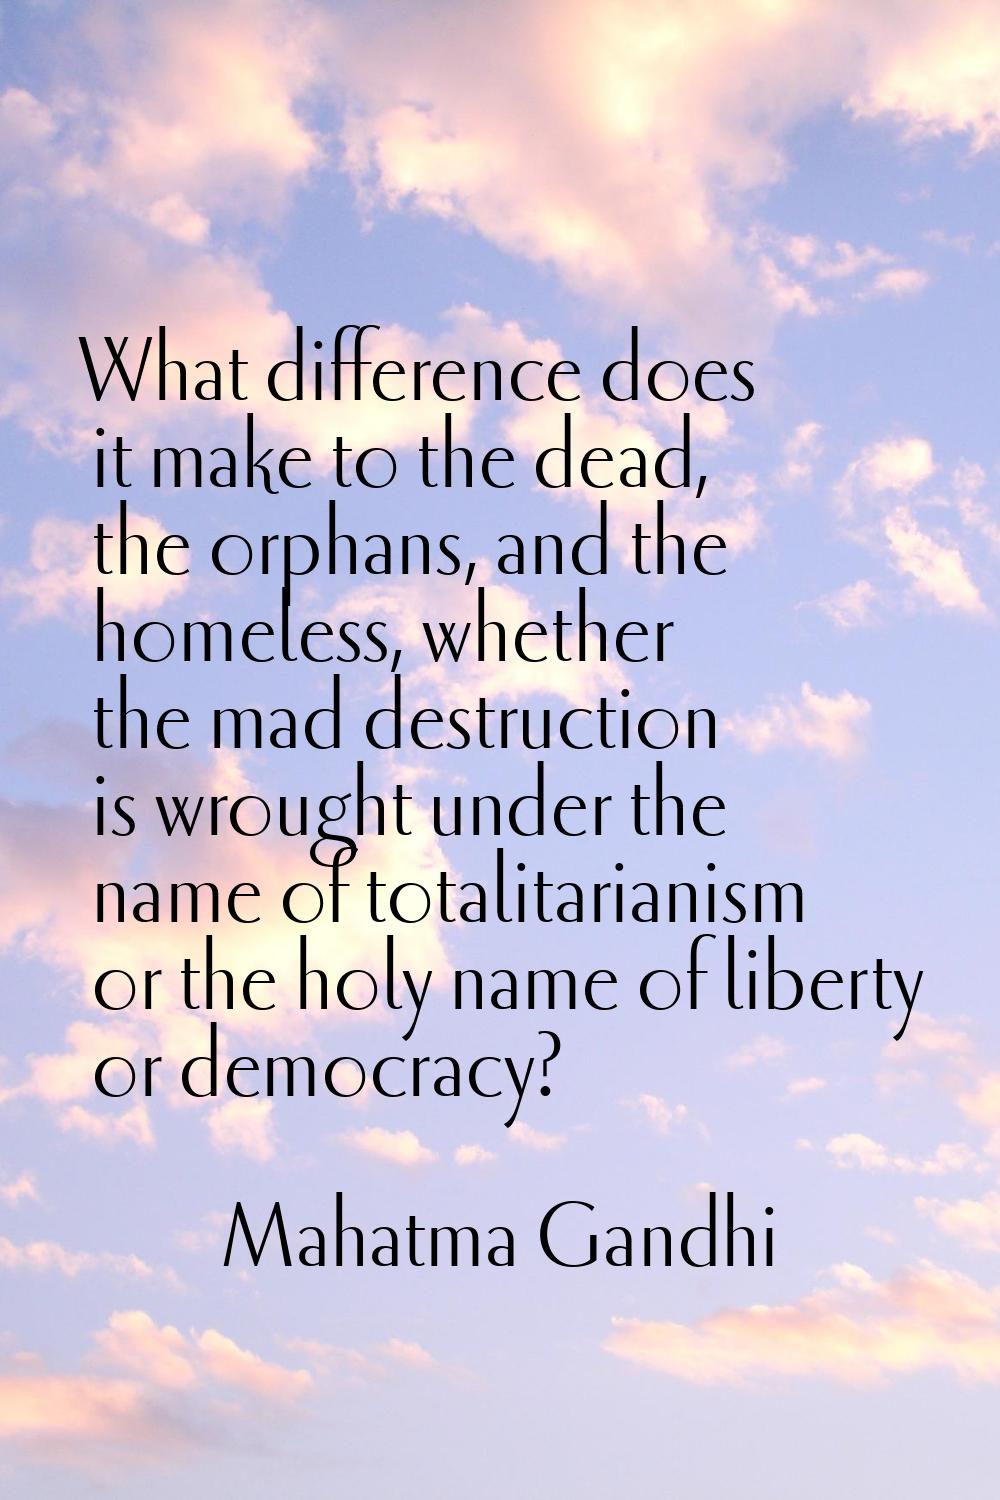 What difference does it make to the dead, the orphans, and the homeless, whether the mad destructio